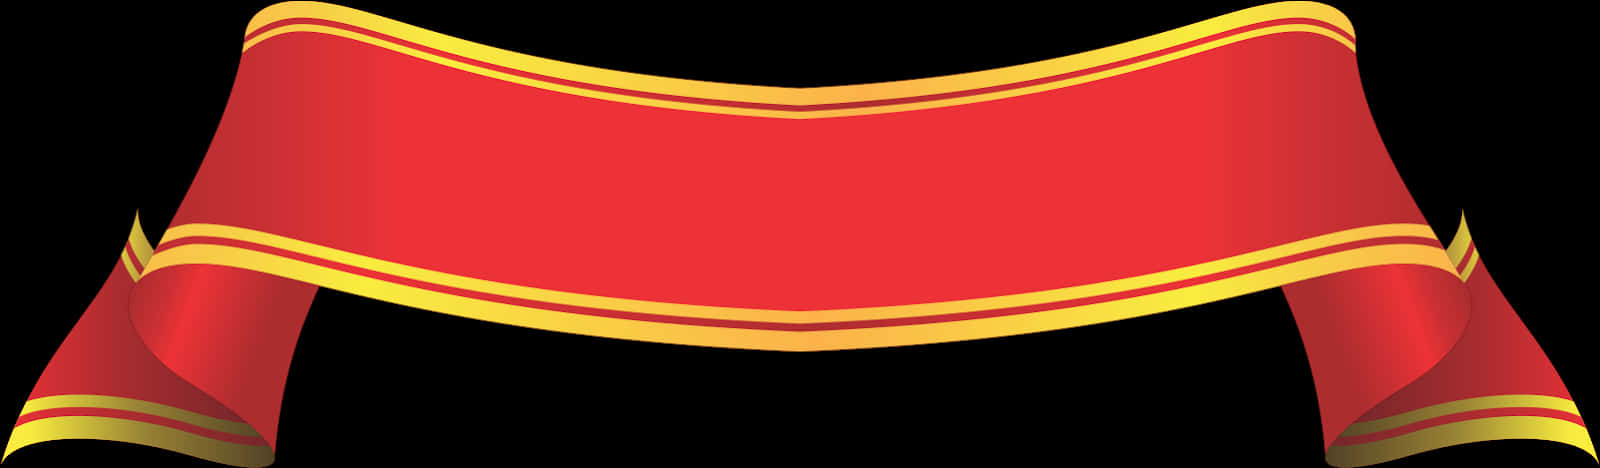 Red Gold Banner Ribbon PNG image